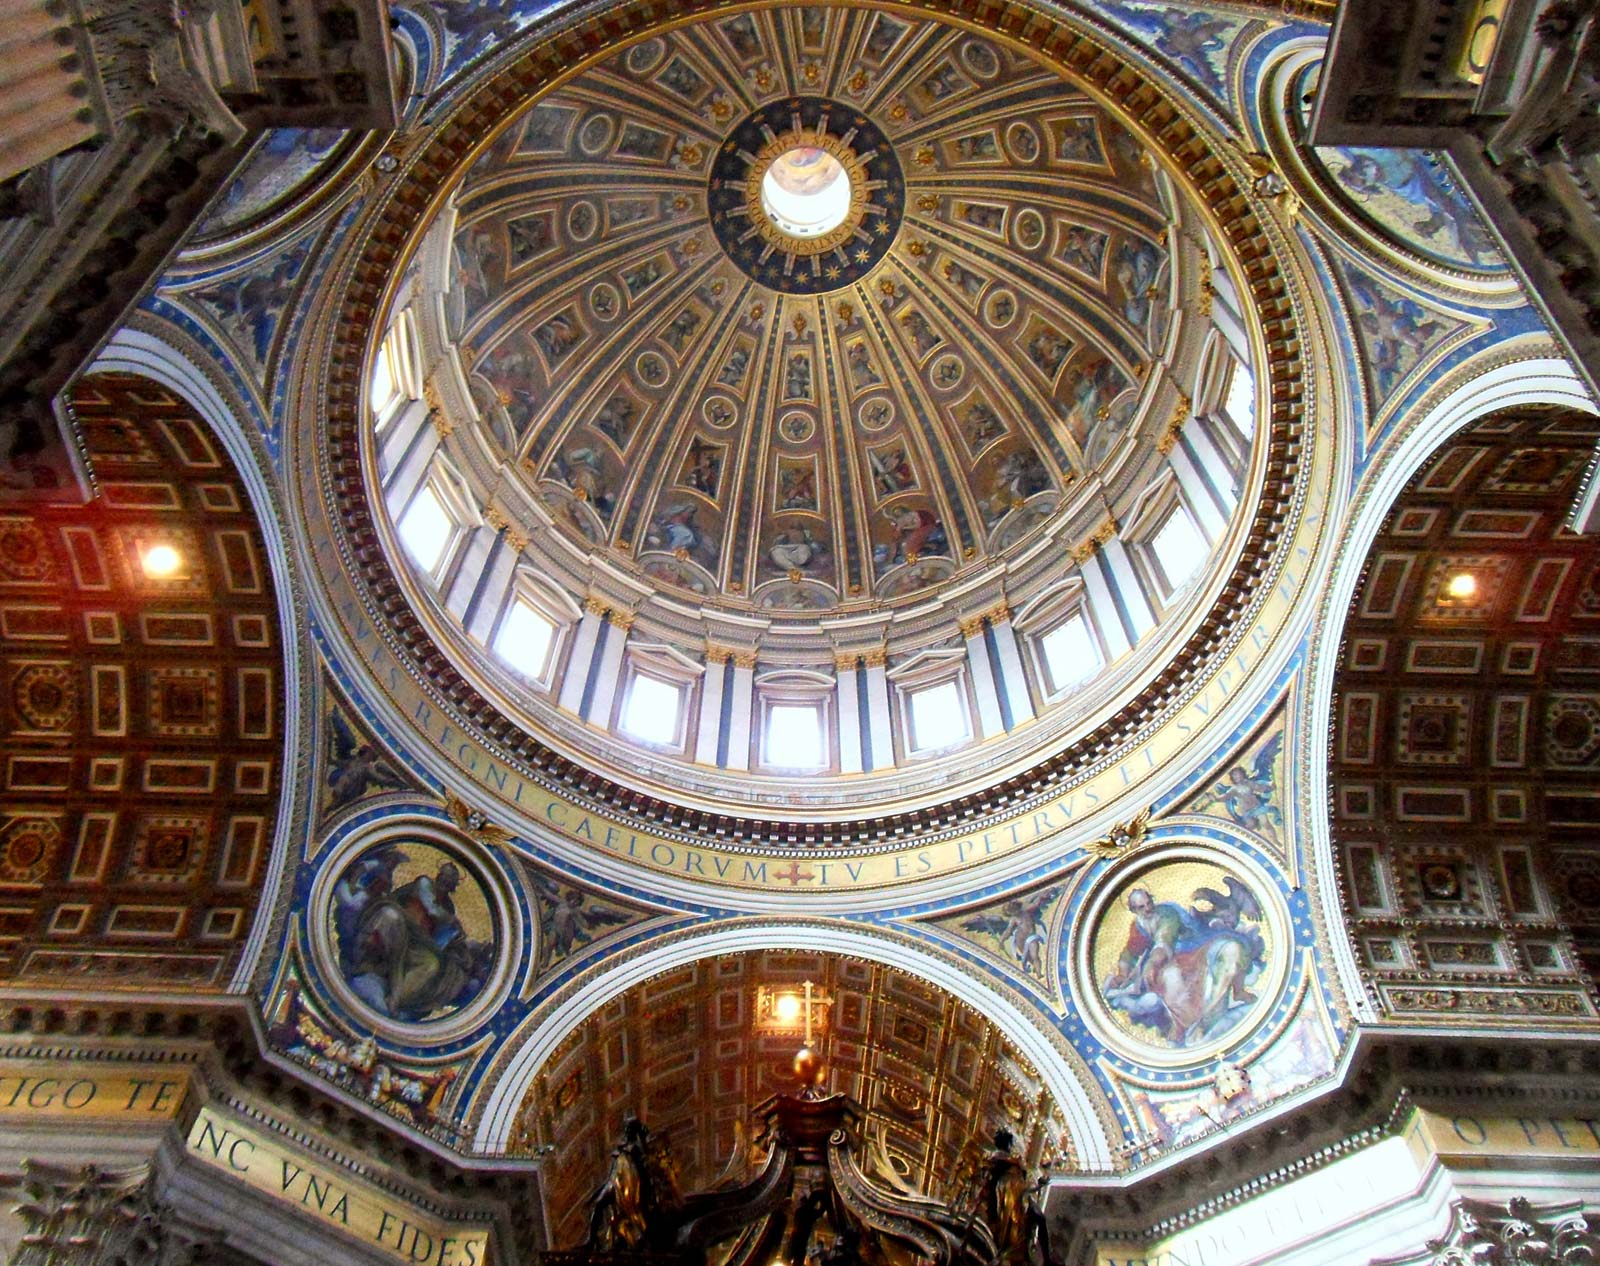 If You Get 17/24 on This Quiz, You’re a Geography Whiz View Dome St Peter's Basilica Vatican City